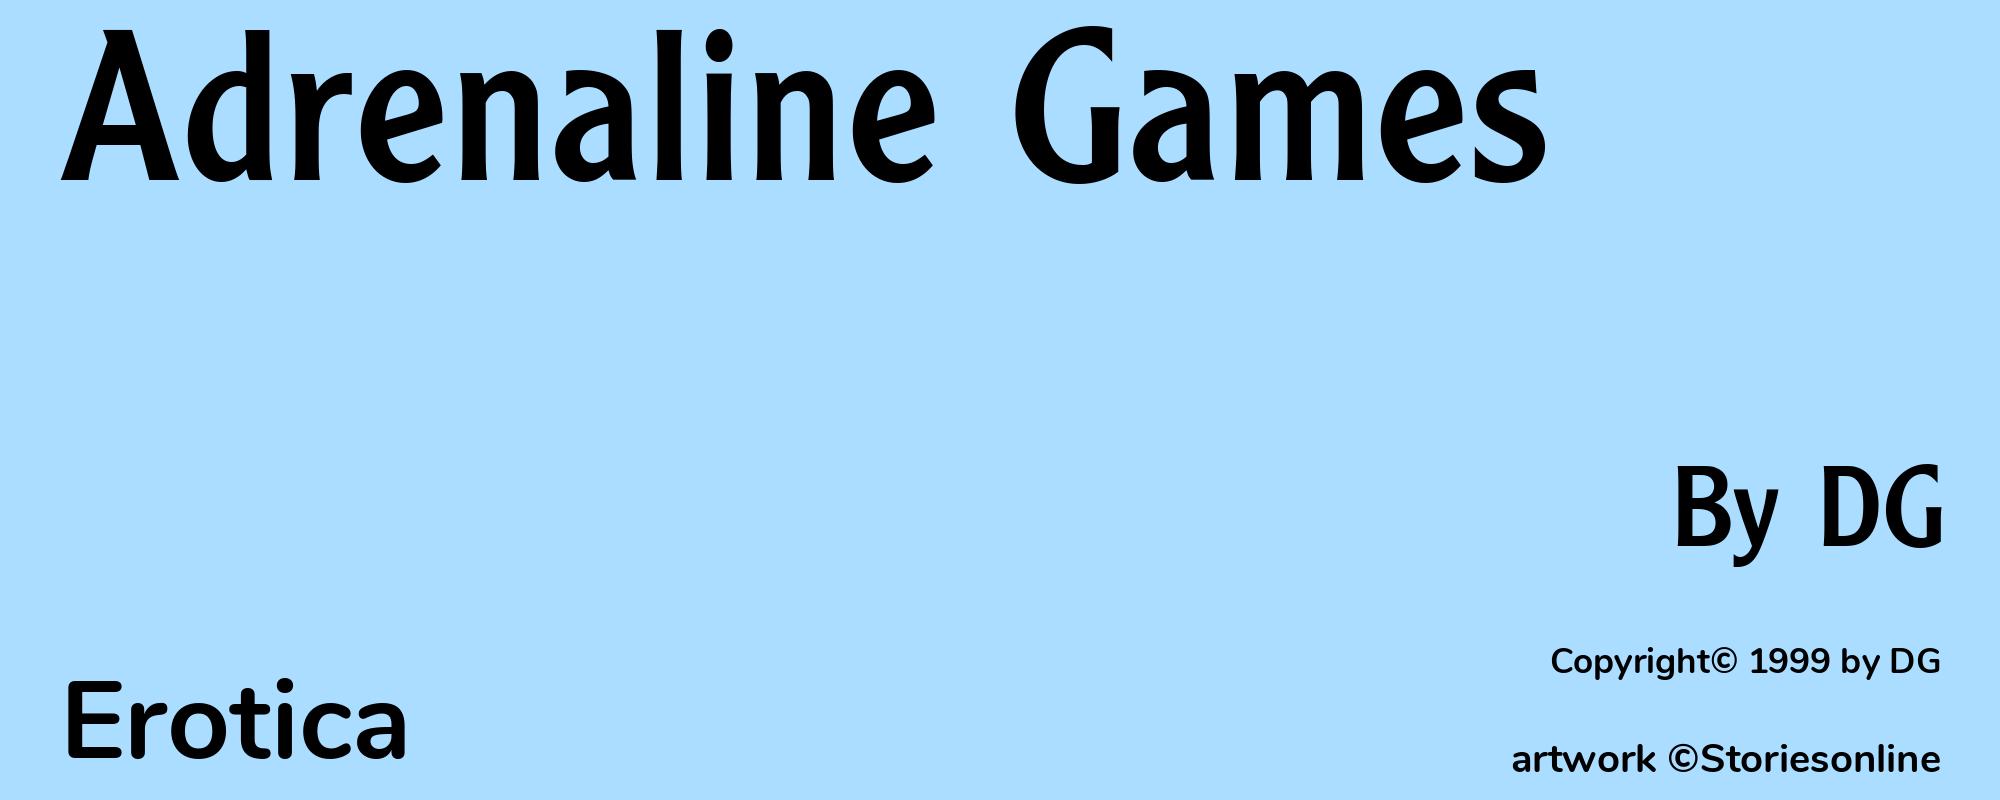 Adrenaline Games - Cover